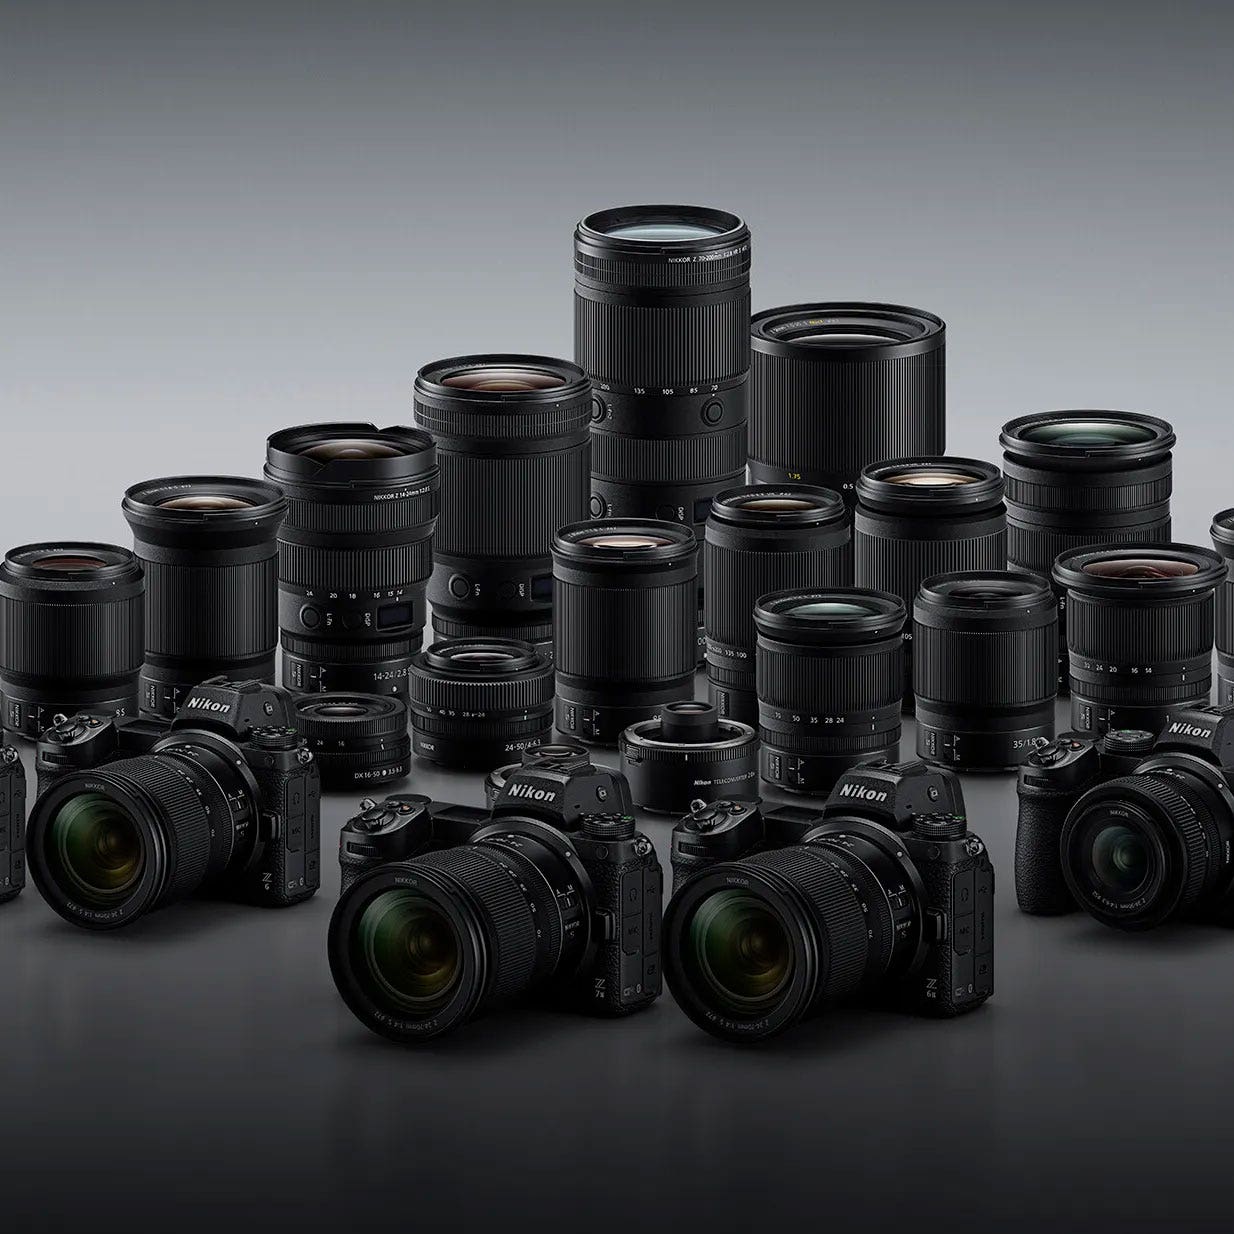 NIKON RELEASES NEW FIRMWARE FOR ITS Z SERIES MIRRORLESS CAMERAS | Nikon Cameras, Lenses & Accessories